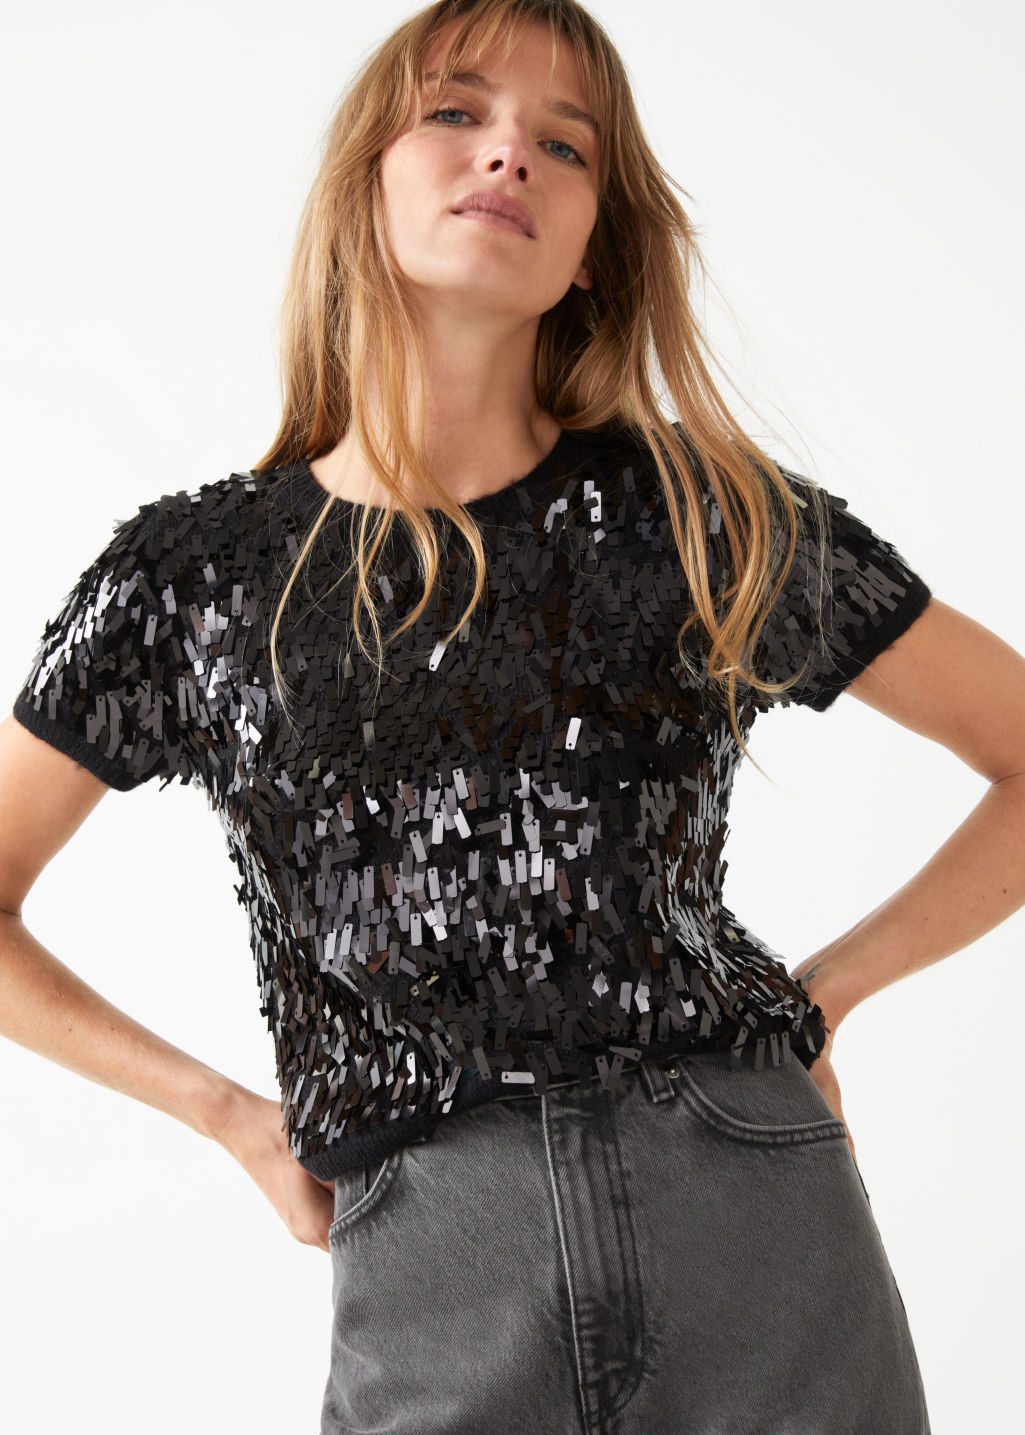 Zara's £50 Sparkly Top Is the Best Party Piece We've Seen | Who What ...